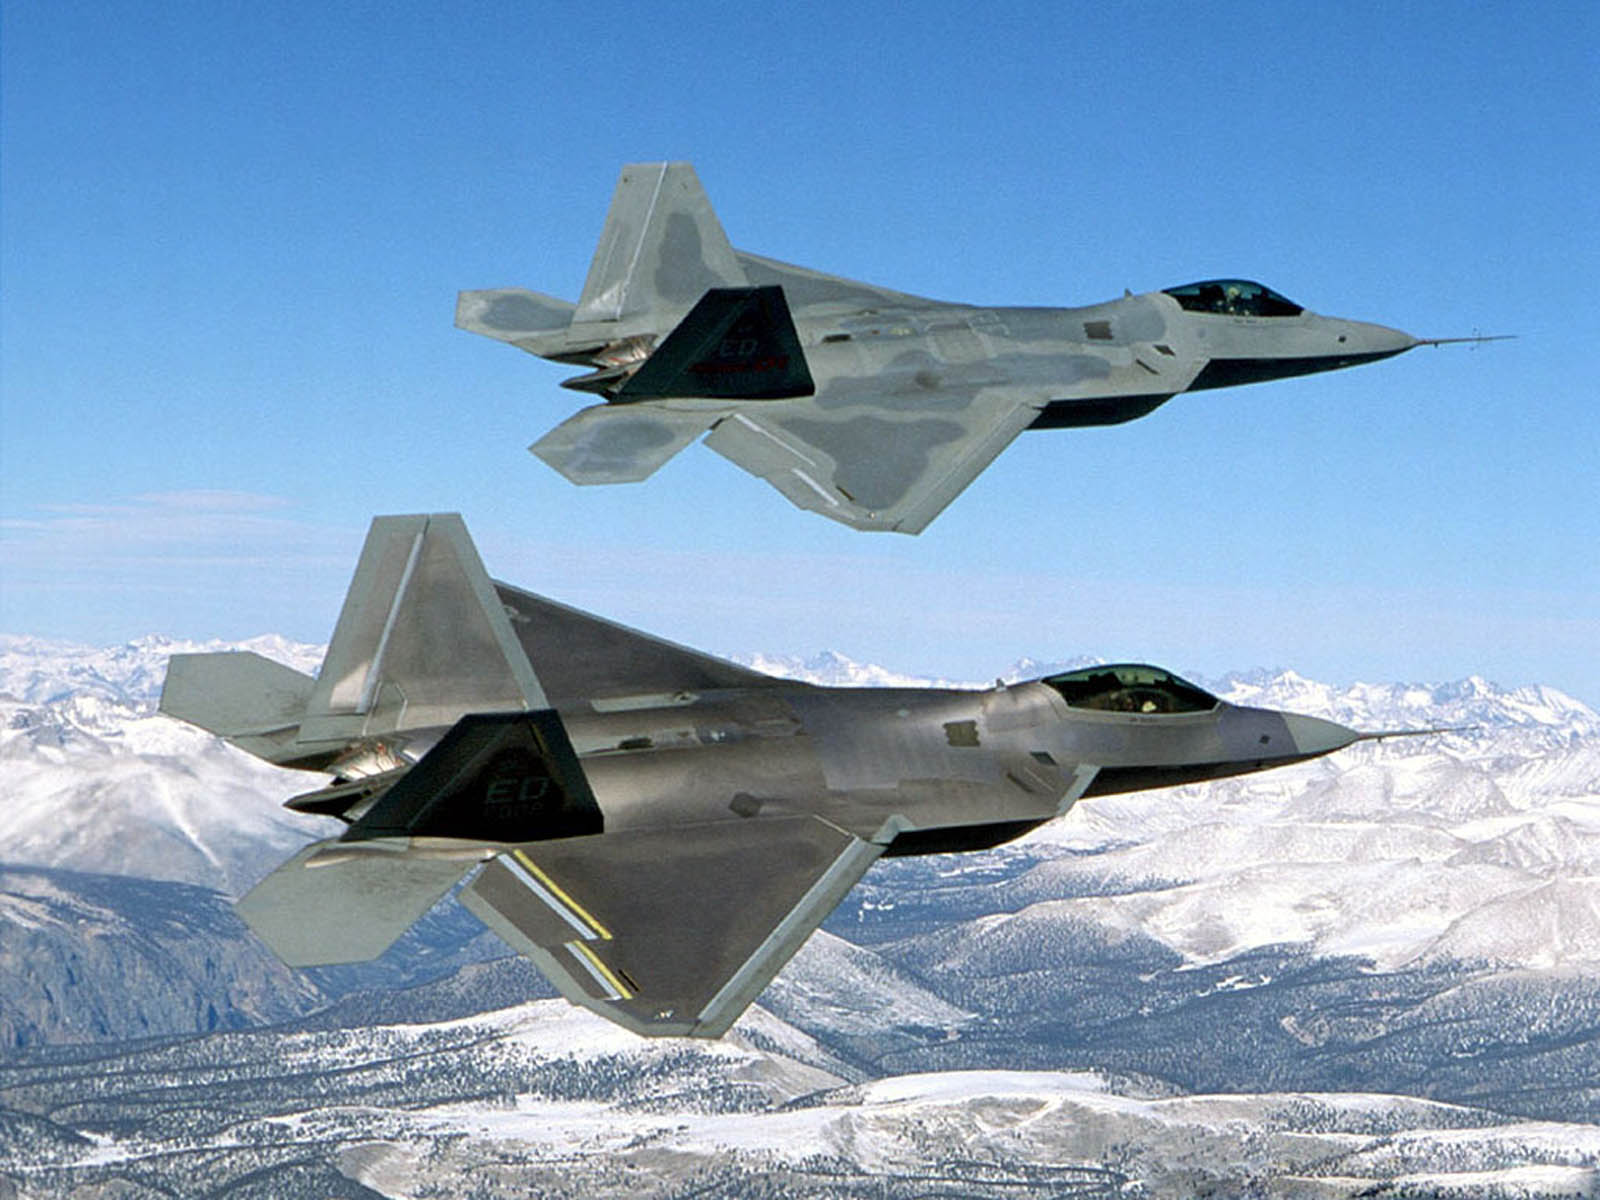 F 22 Raptor Military Jet Fighter Wallpaperswallpapers